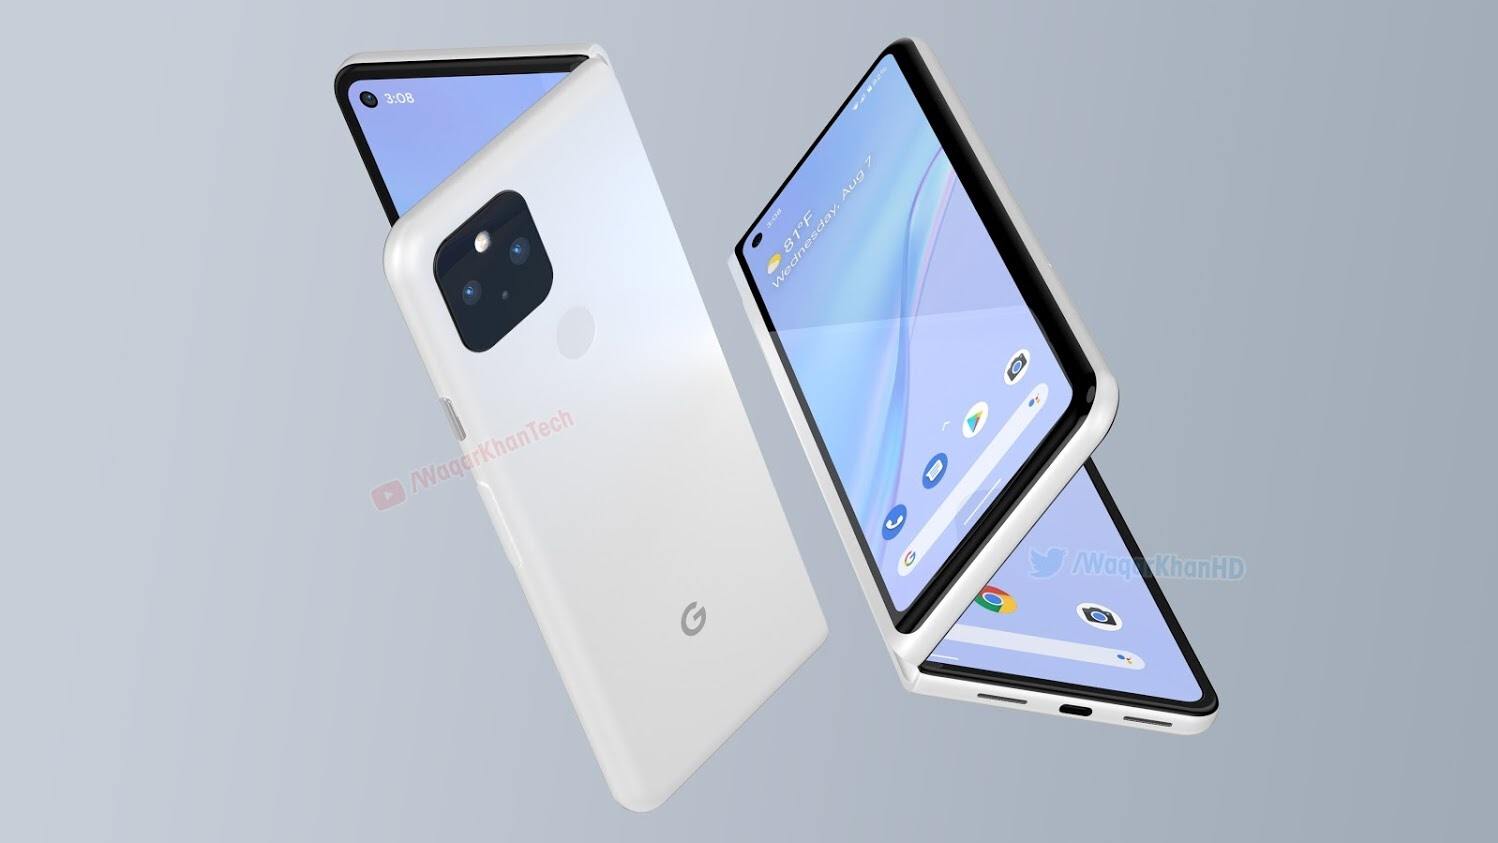 That’s why the foldable Google Pixel phone is great news for all of us